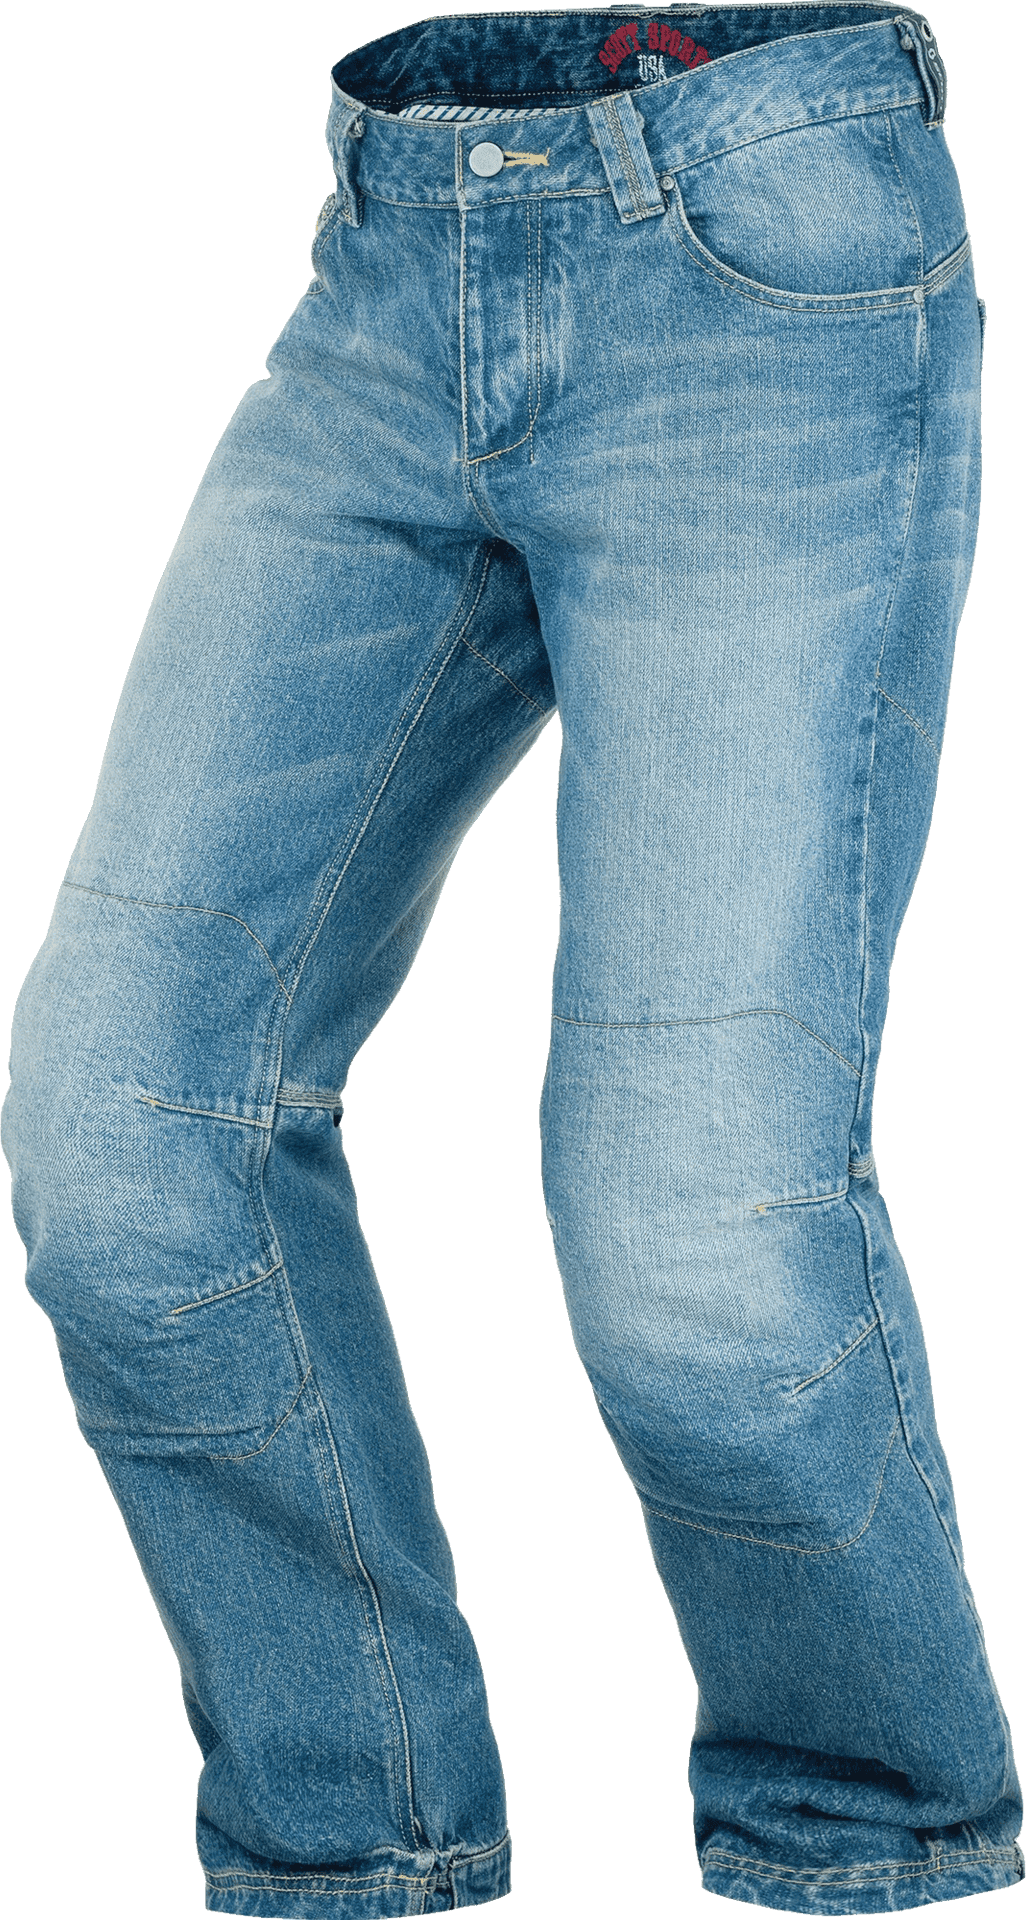 Blue Denim Jeans Standing Isolated PNG image